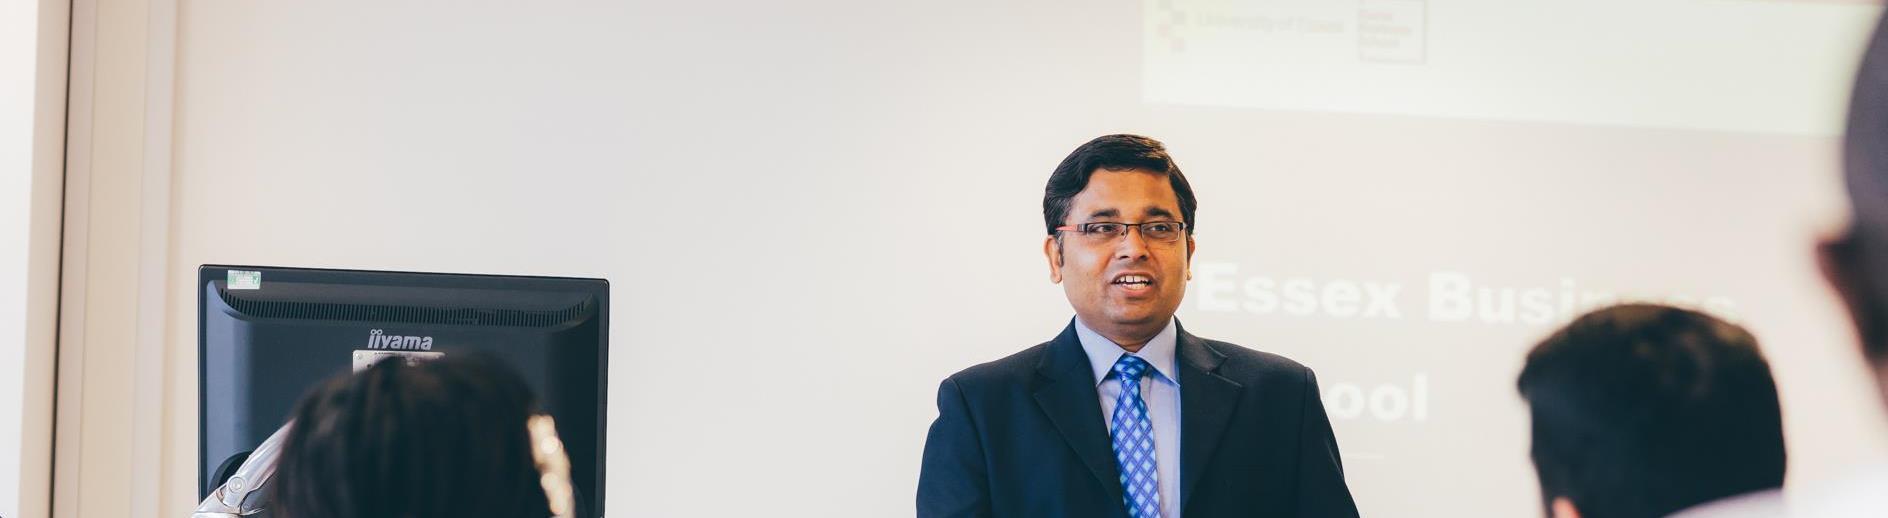 Professor Niraj Kumar, Professor of Operations and Supply Chain Management and Head of the Strategy, Operations and Entrepreneurship Group at Essex Business School Southend